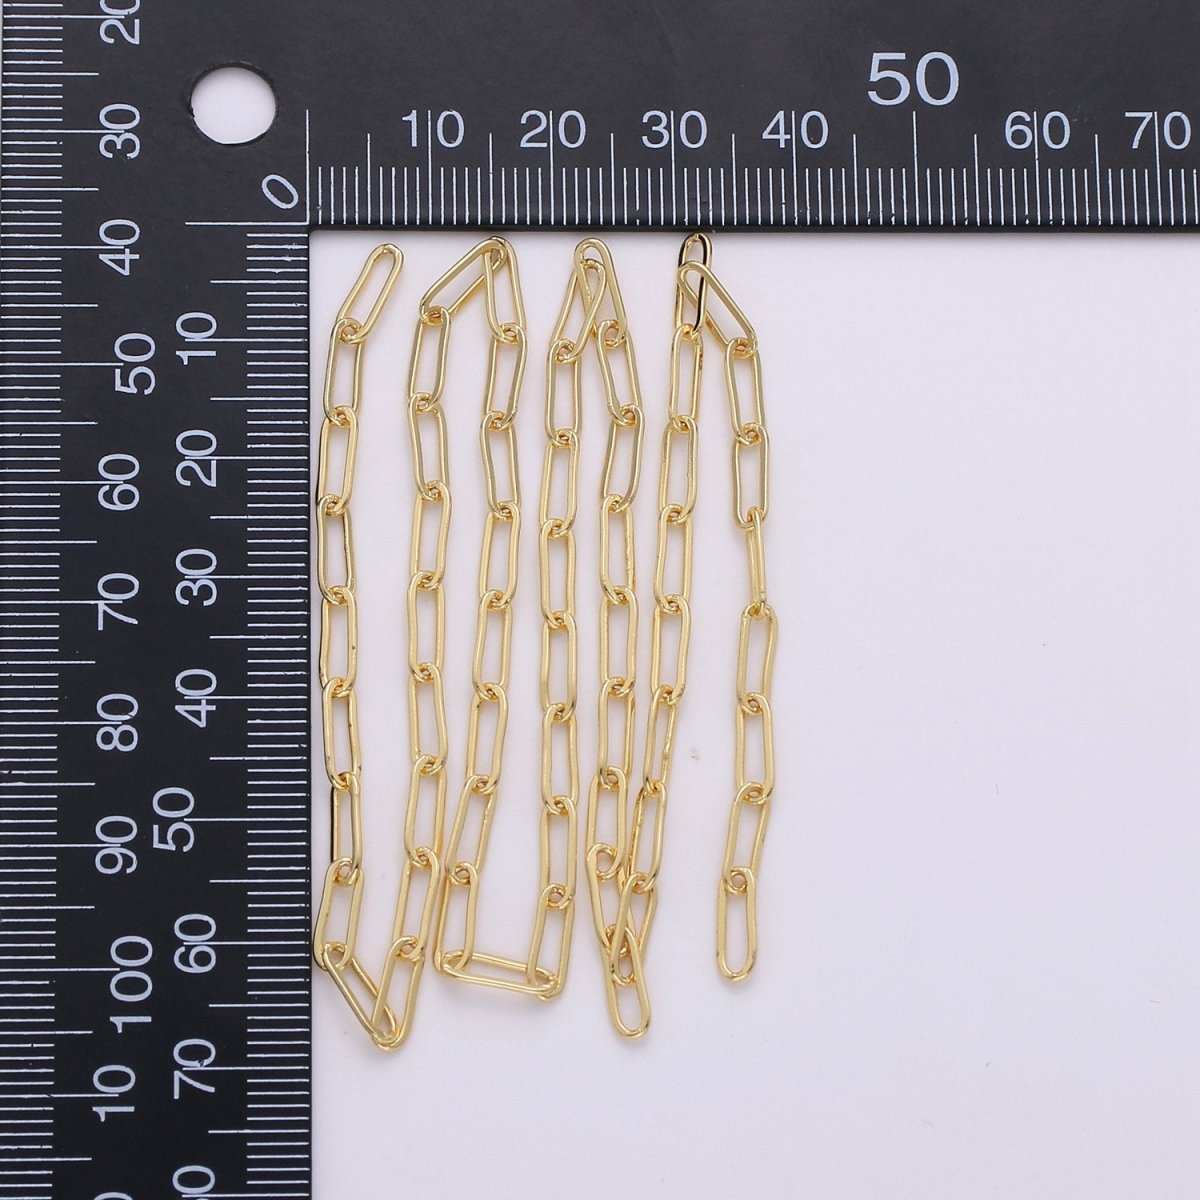 24K Gold Filled PAPERCLIP Chain, Elongated Rectangular Link Chain Paper Clip Chain Sold by the Yard Unfinished Chain 9x2.5mm | ROLL-125 ROLL-126 ROLL-005 Clearance Pricing - DLUXCA